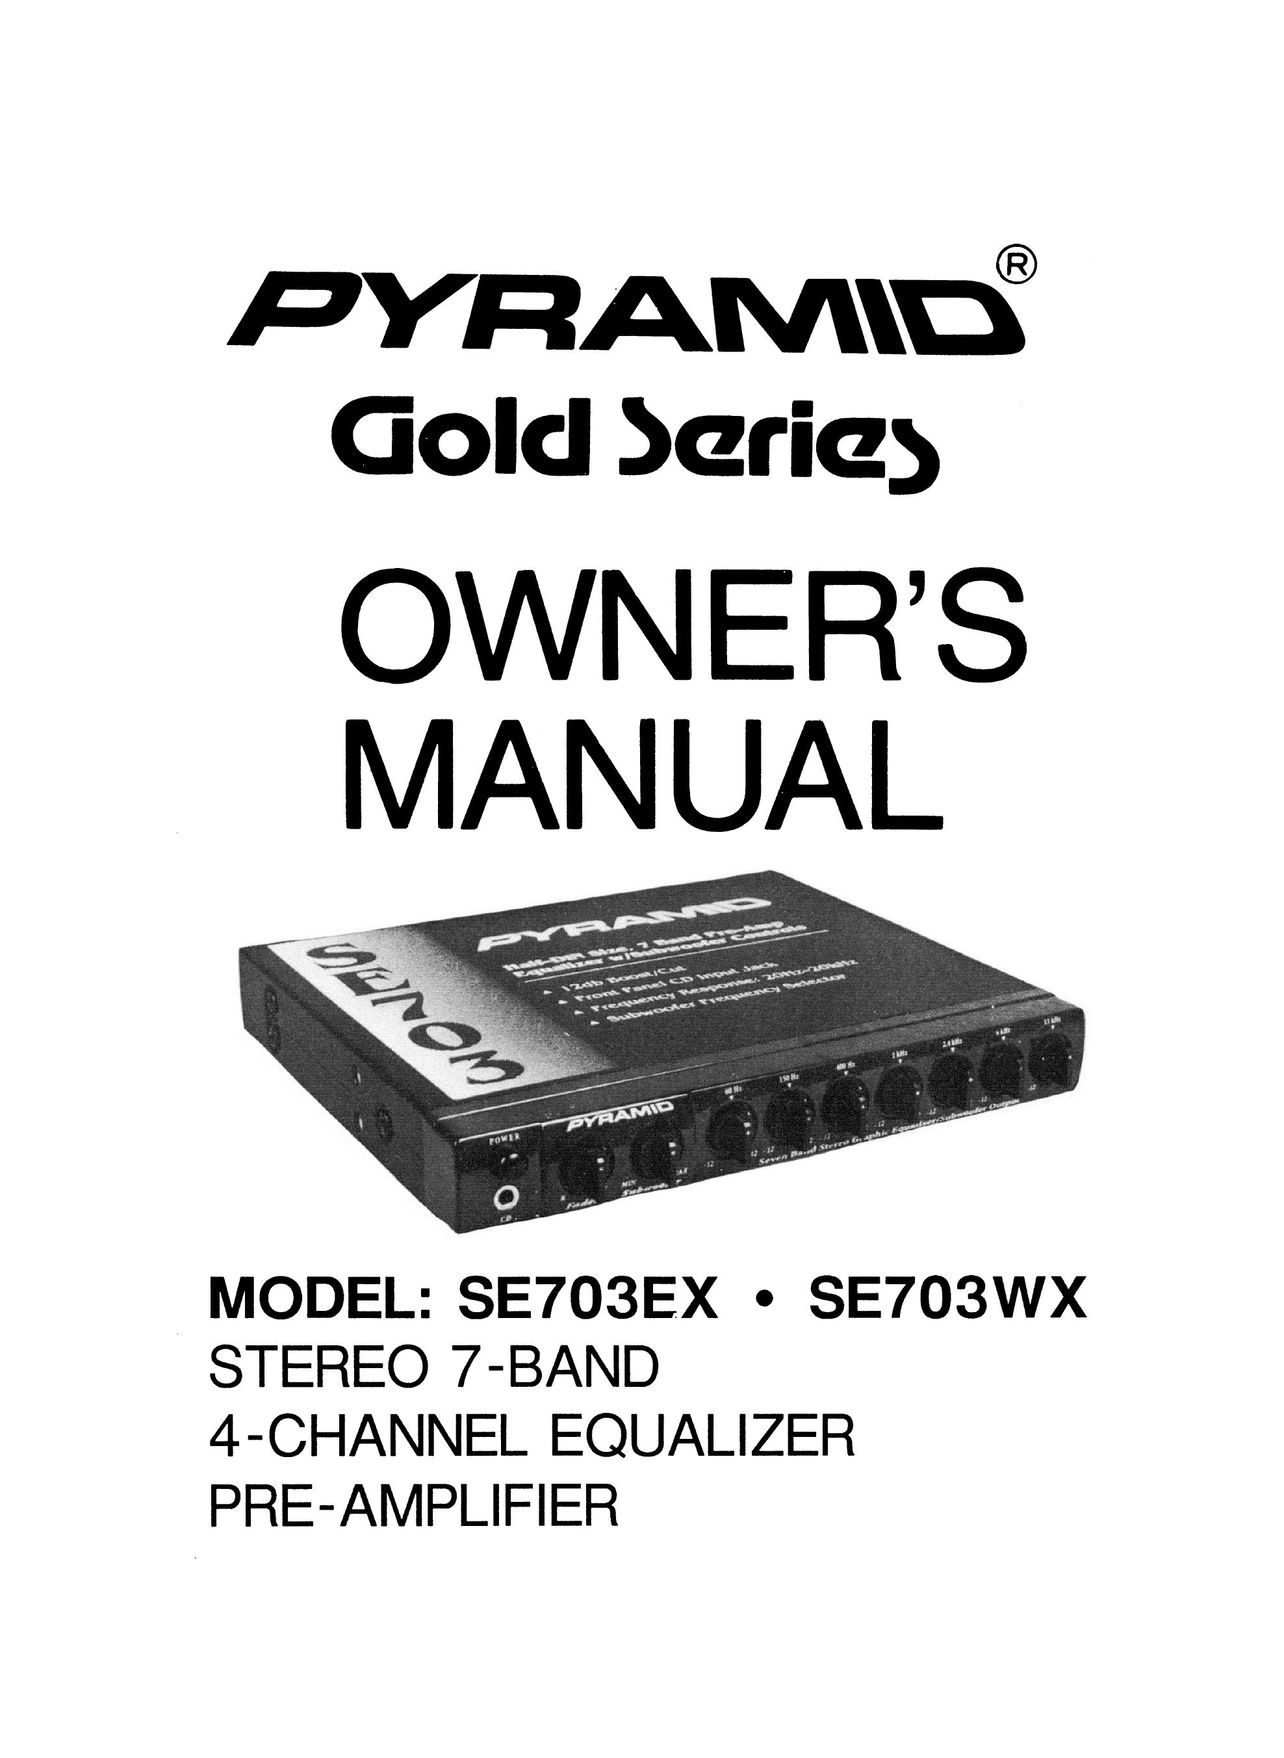 Pyramid Technologies SE703WX Home Theater System User Manual